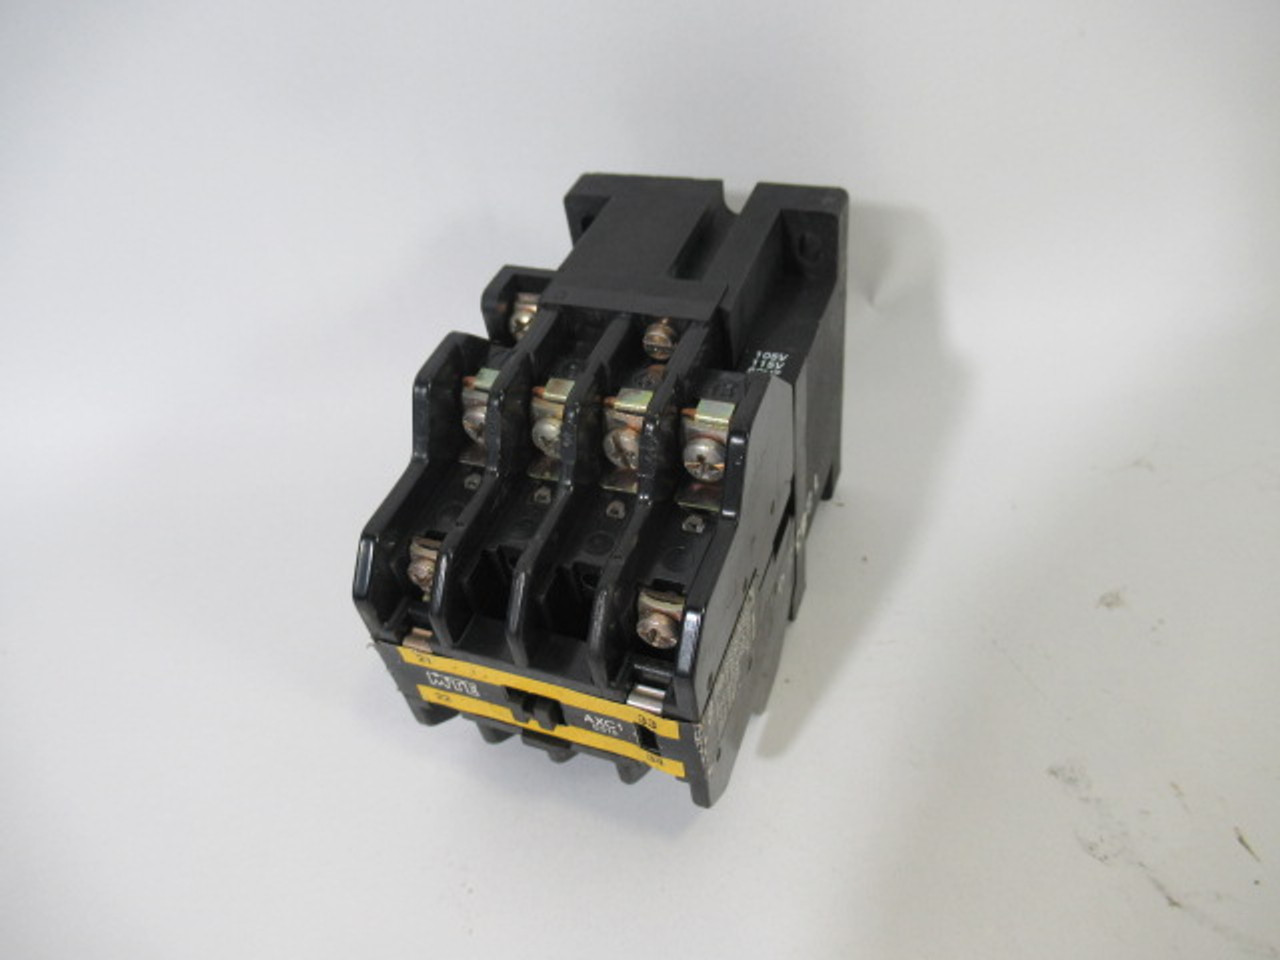 MTE AXC1-0315 Contactor 32A 105/115V@60Hz *Missing Screw* USED